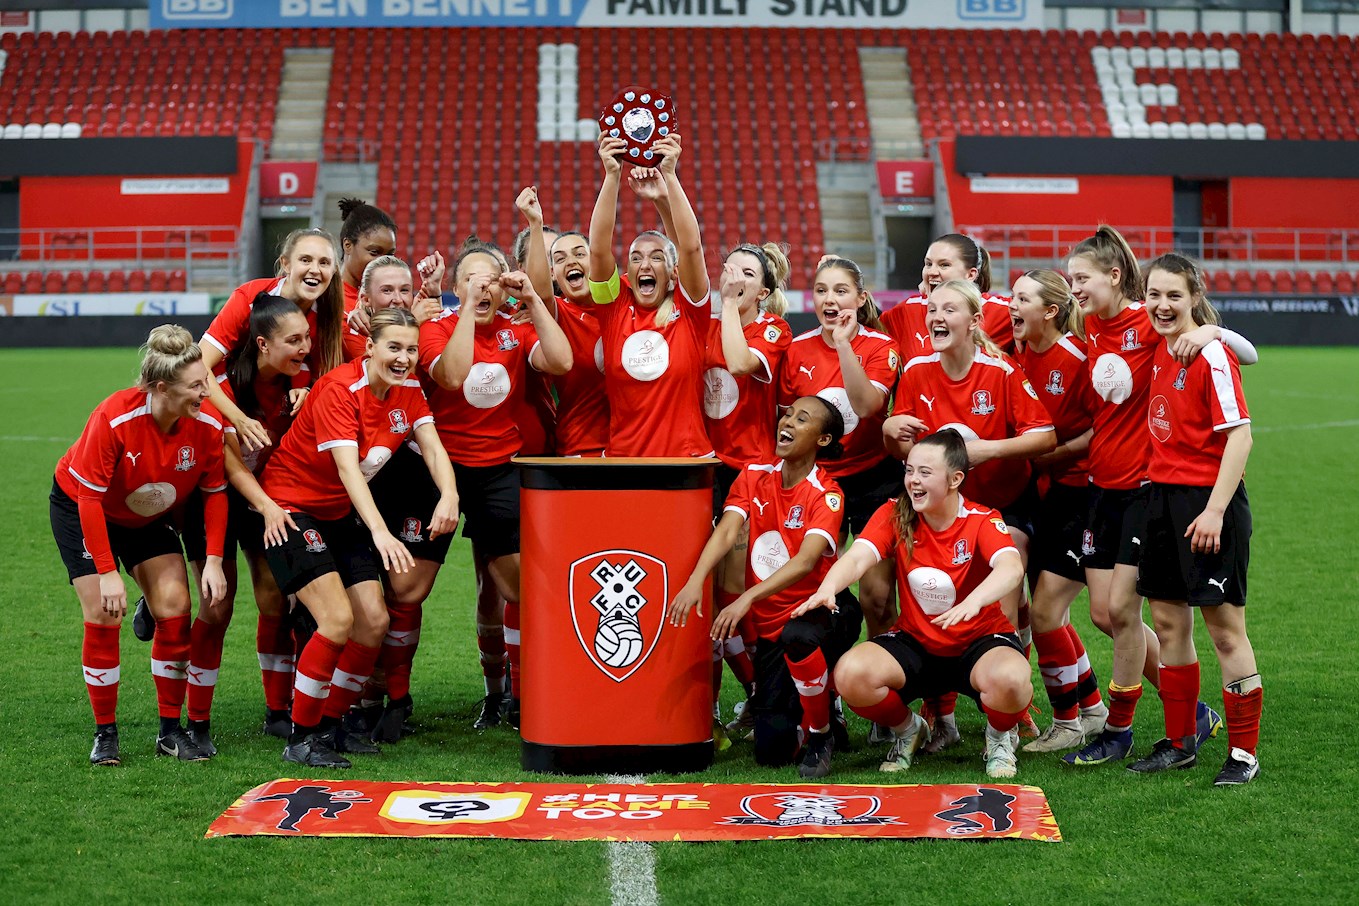 READ | Millers thank supporters after #HerGameToo Shield success – News